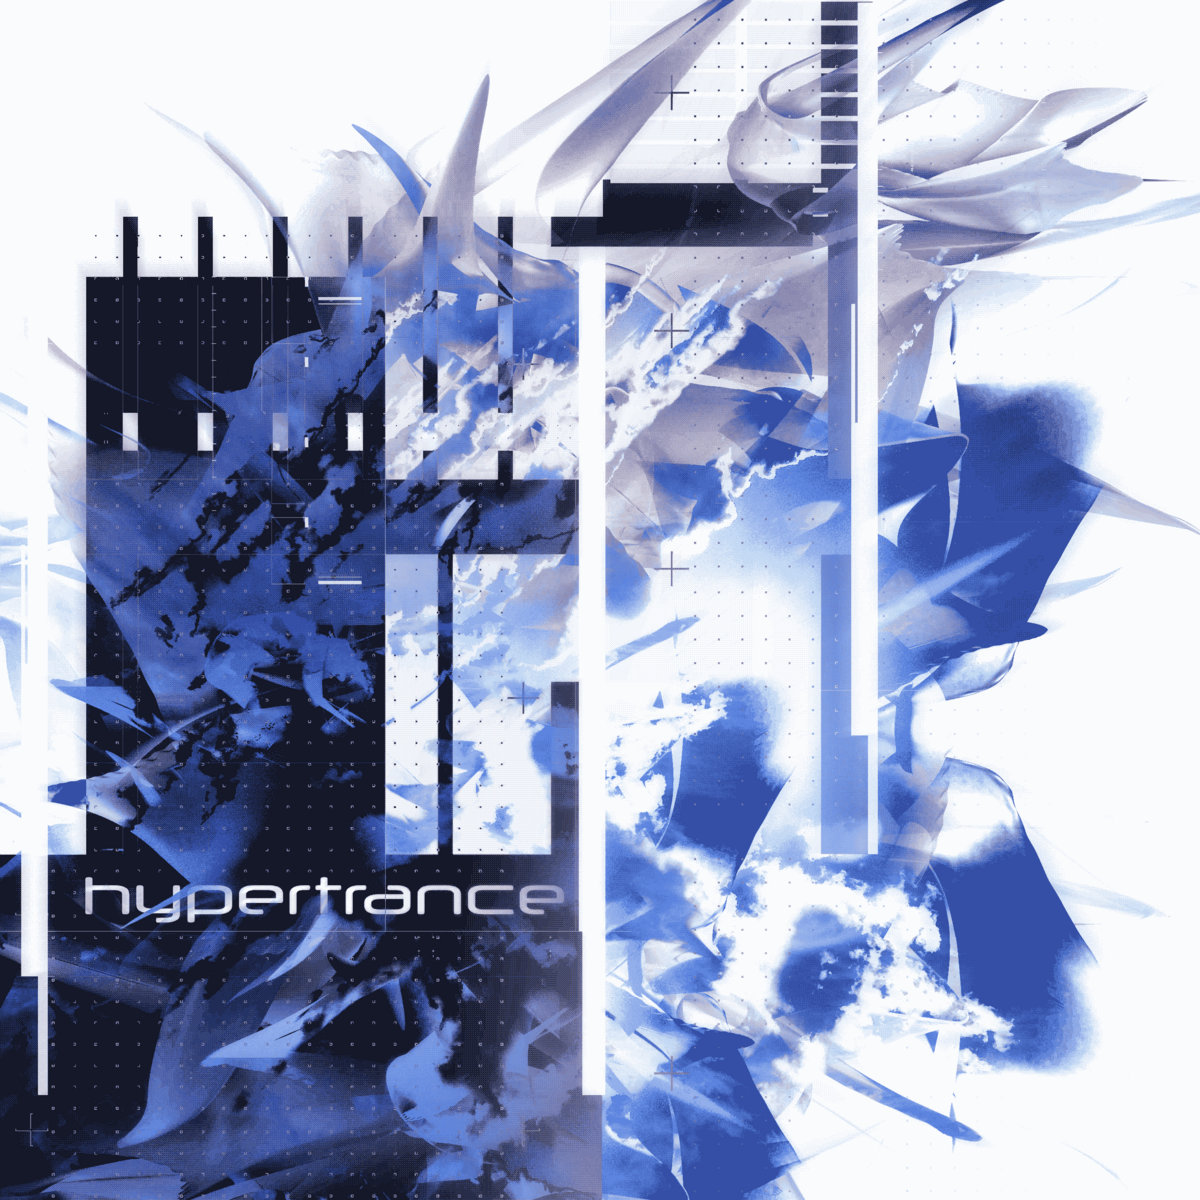 The cover to the single version of Hypertrance by nuphory.